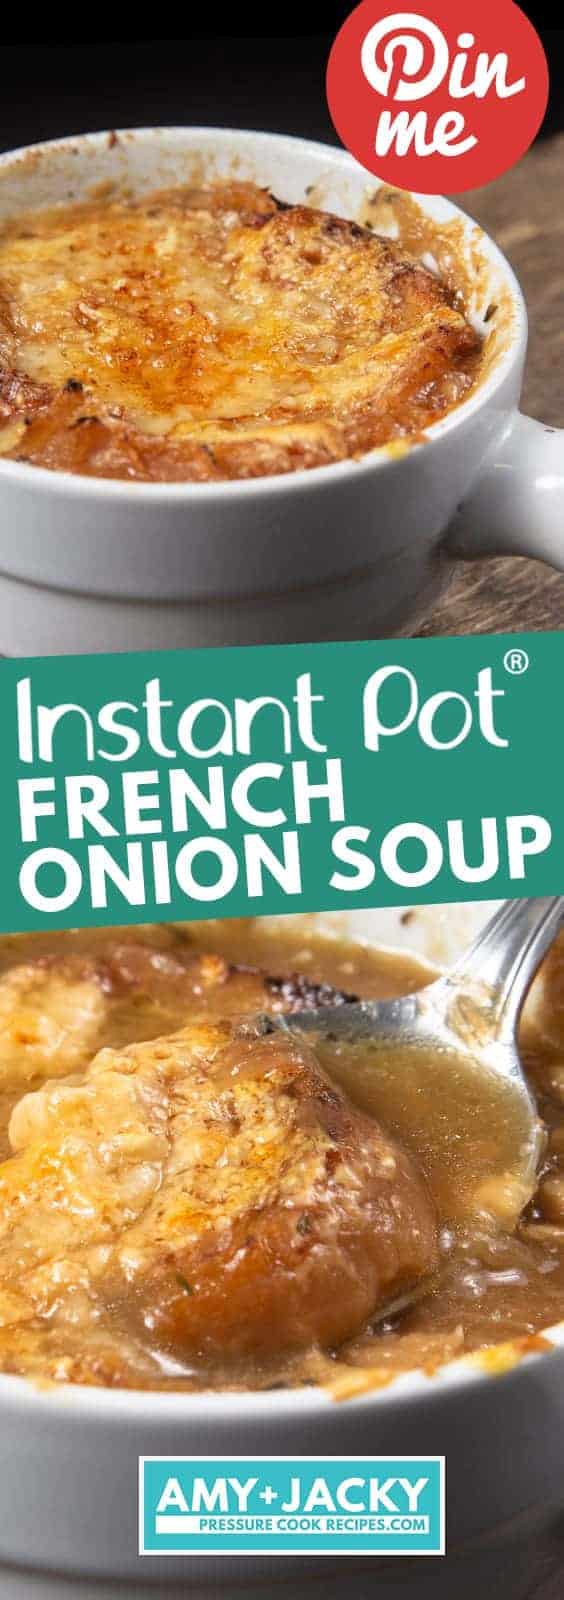 Instant Pot French Onion Soup | Pressure Cooker French Onion Soup | Instapot French Onion Soup | Instant Pot Soup | Pressure Cooker Soup | Instant Pot Recipes | Pressure Cooker Recipes #soup #recipes 